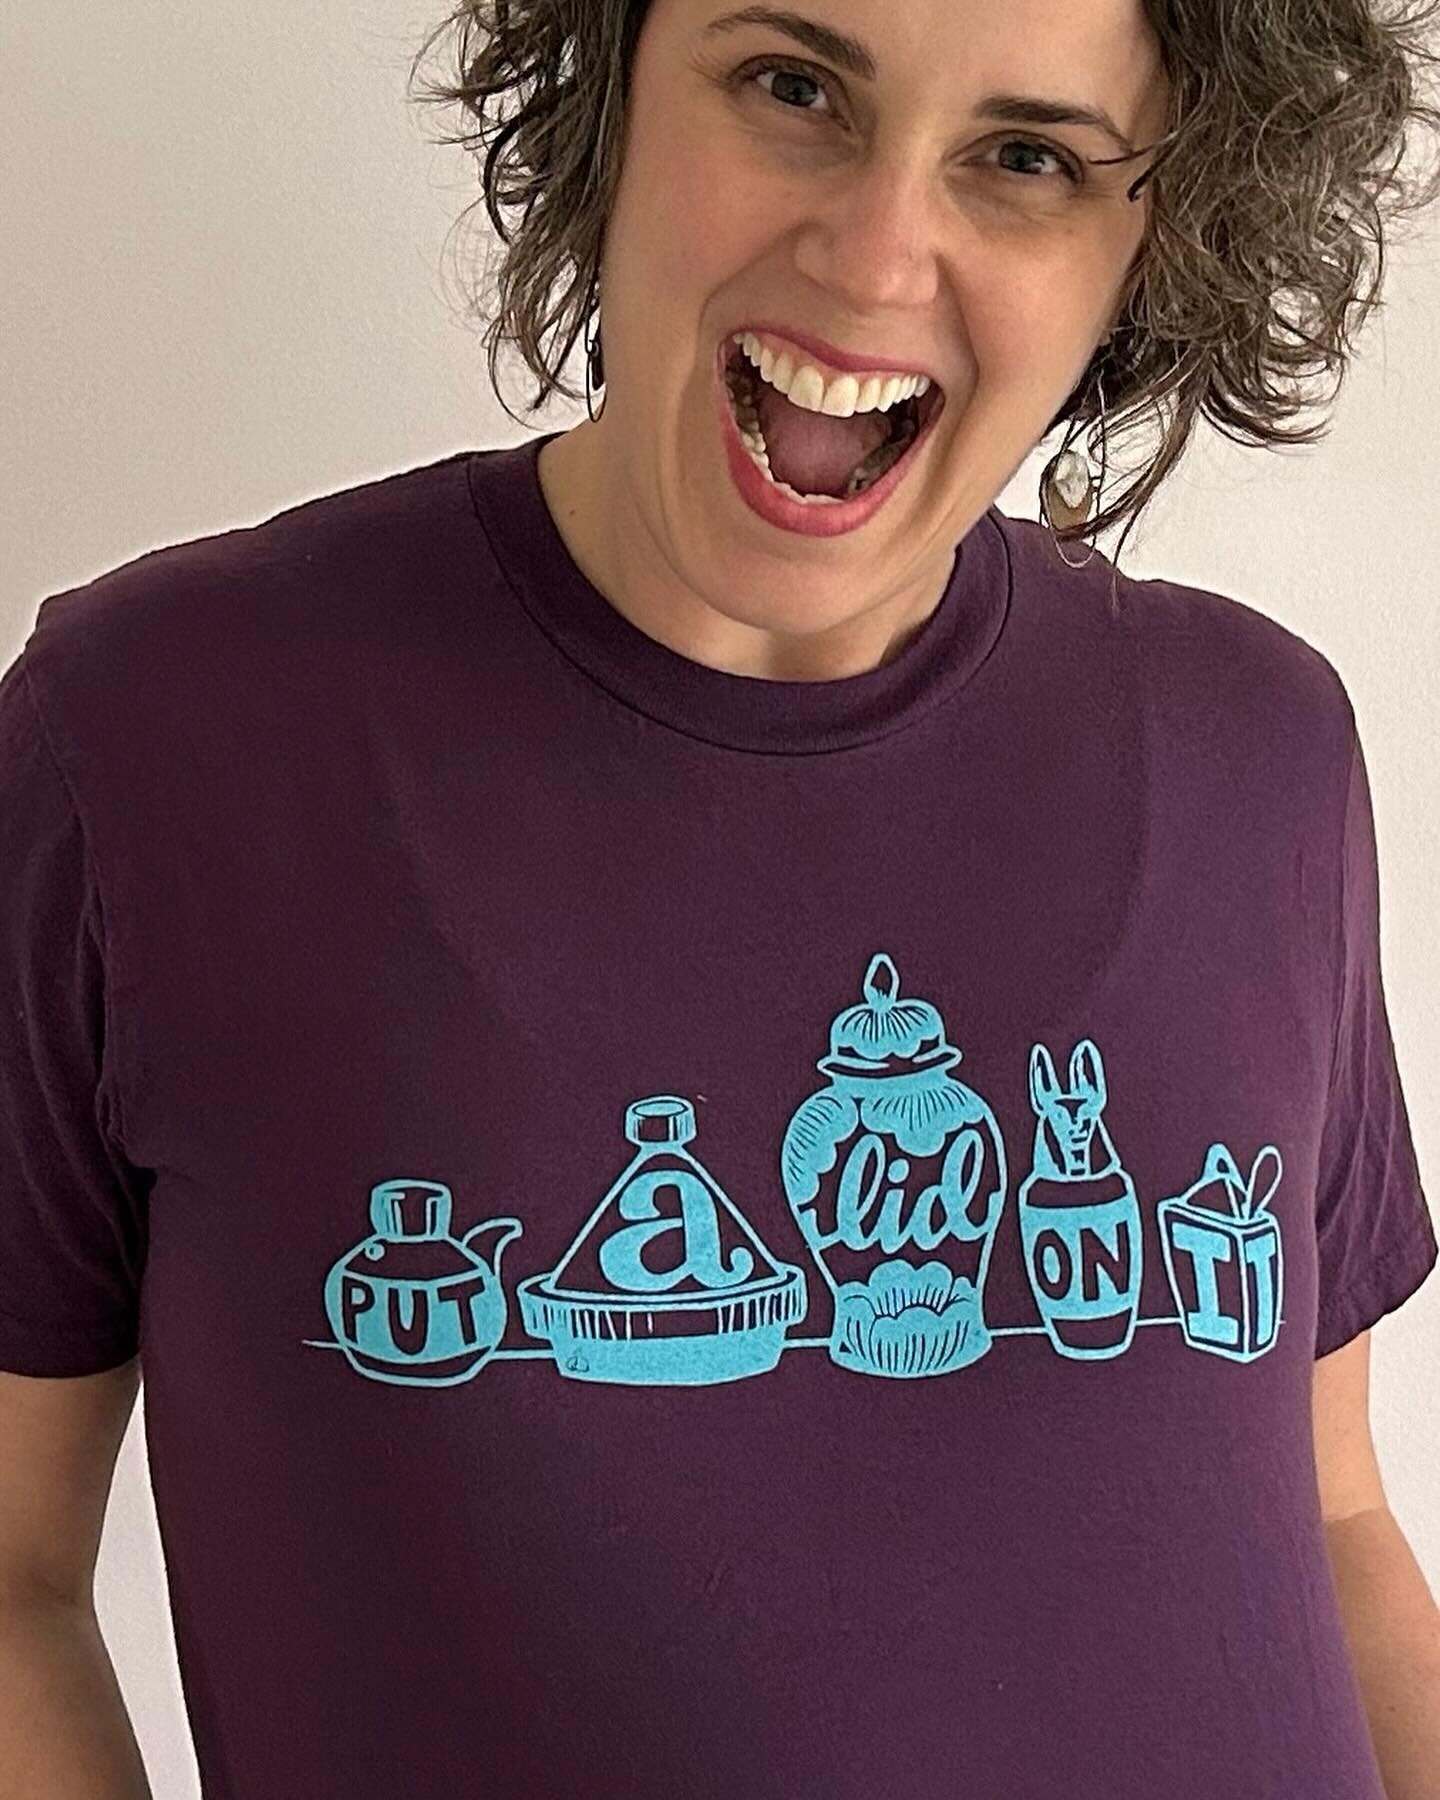 New t-shirts just in time for the @nceca conference. Come get yours @cornellstudiosupply booth #128 in the convention center. They will have these colorful short sleeve tees and a couple long sleeve options (black and dark gray with white ink). 💕 #p